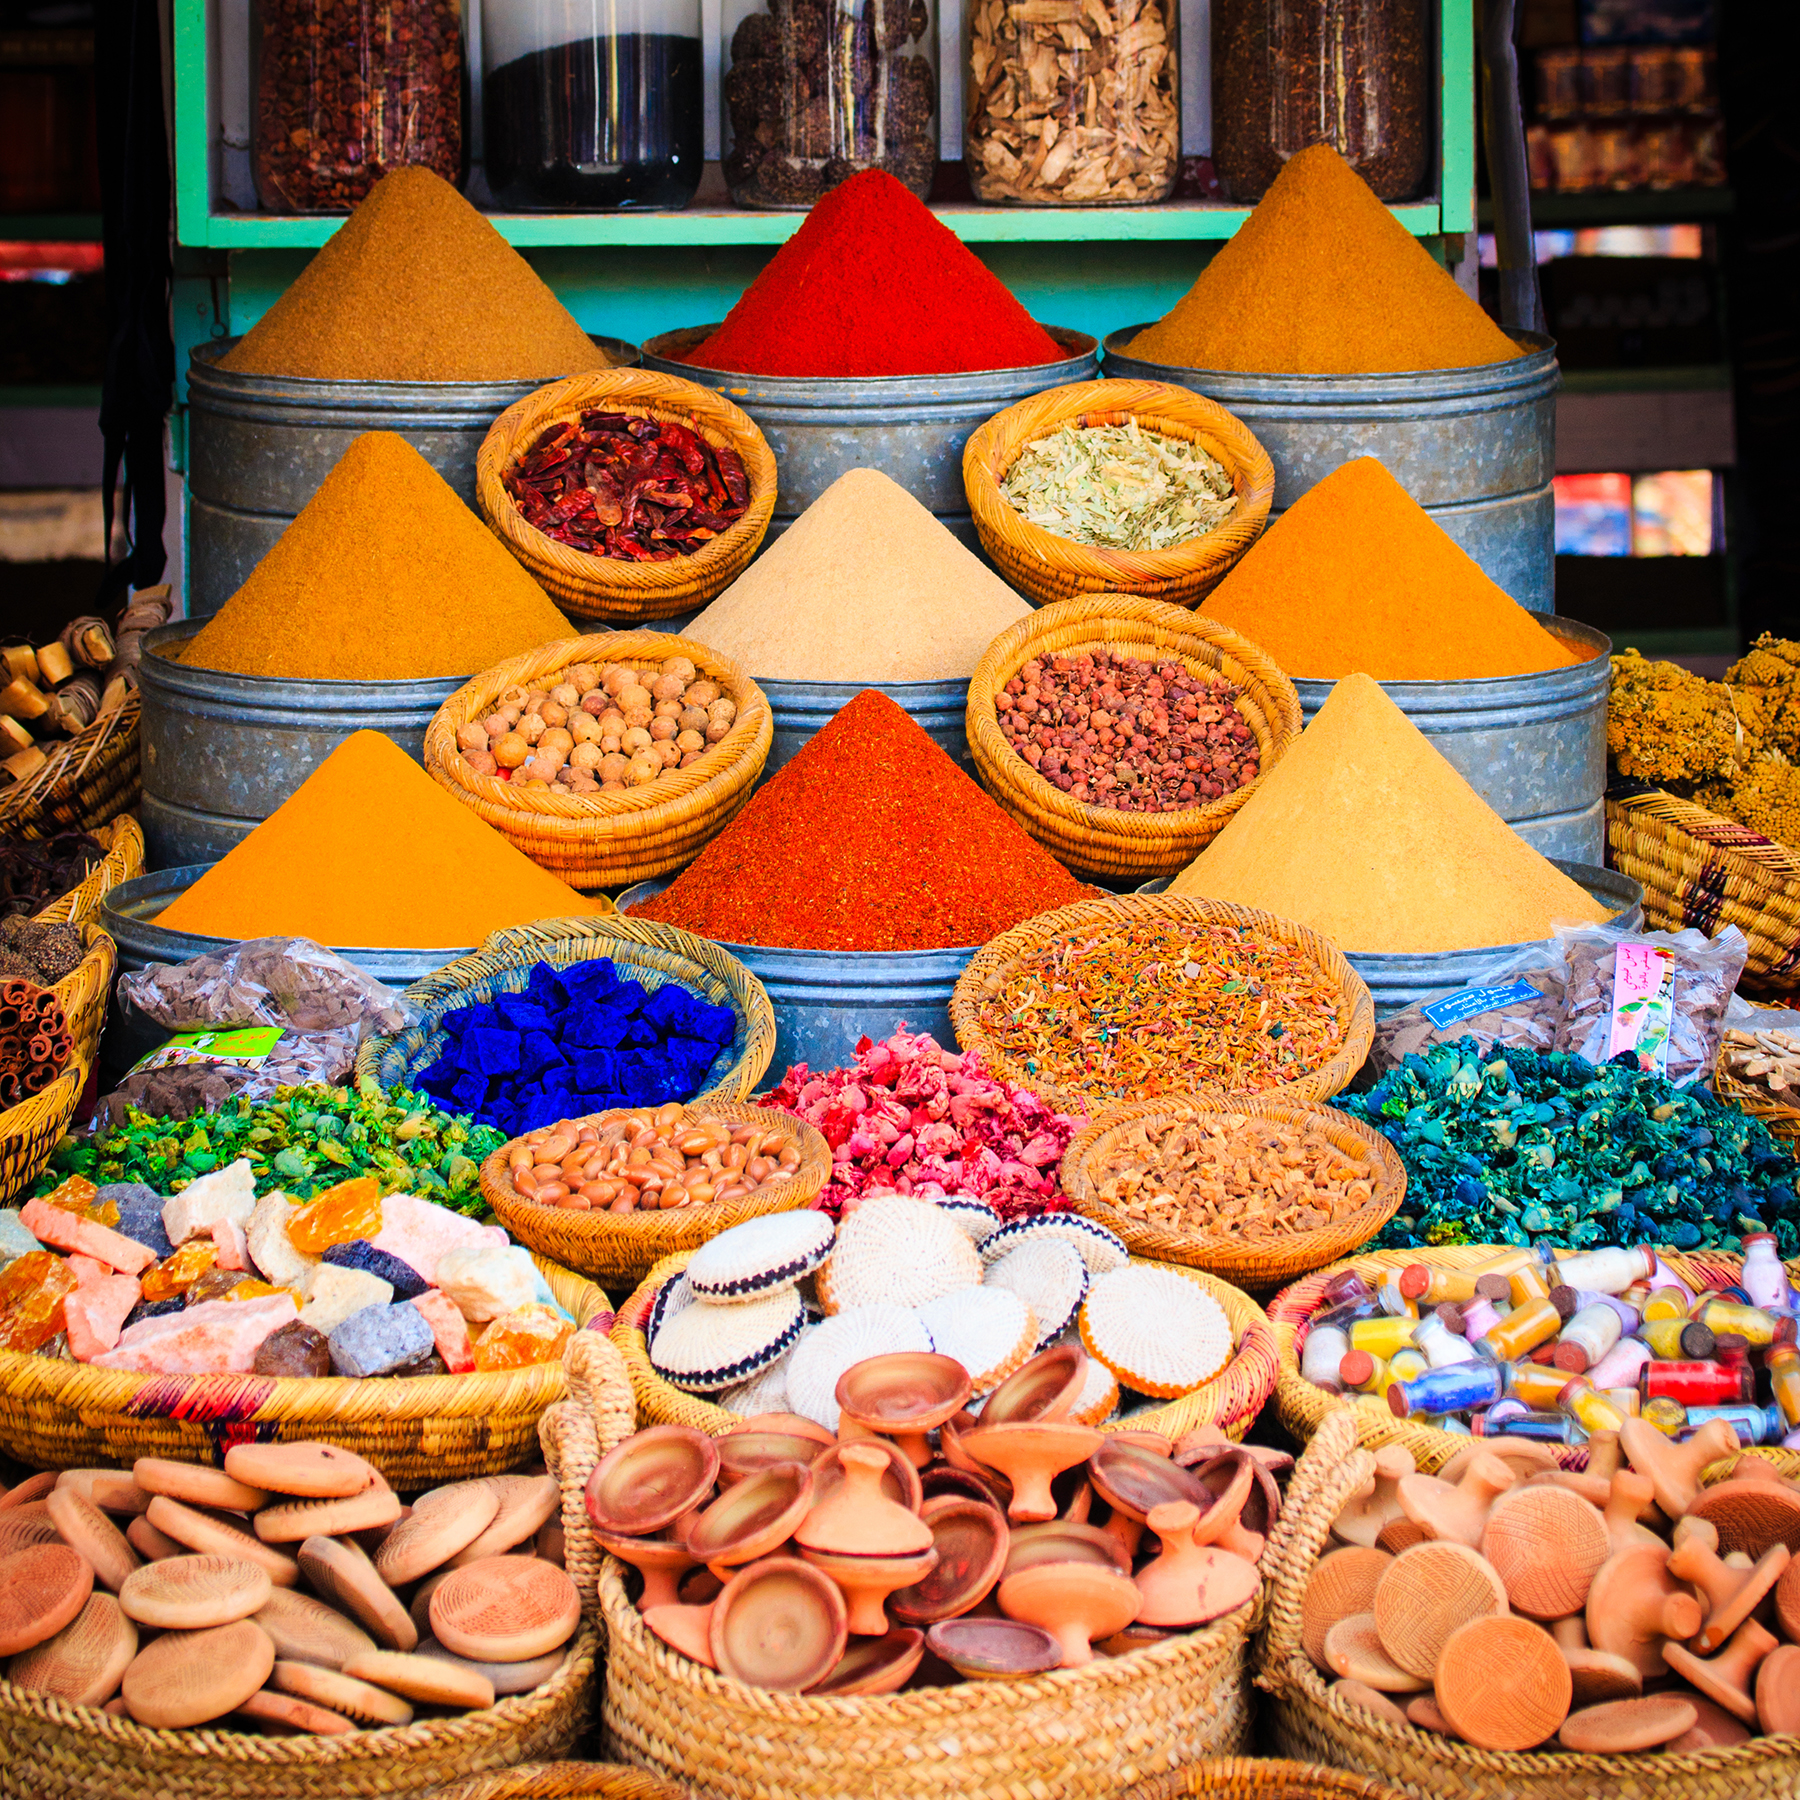 Spice market in Marrakesh, brightly colored different spices in different containers.